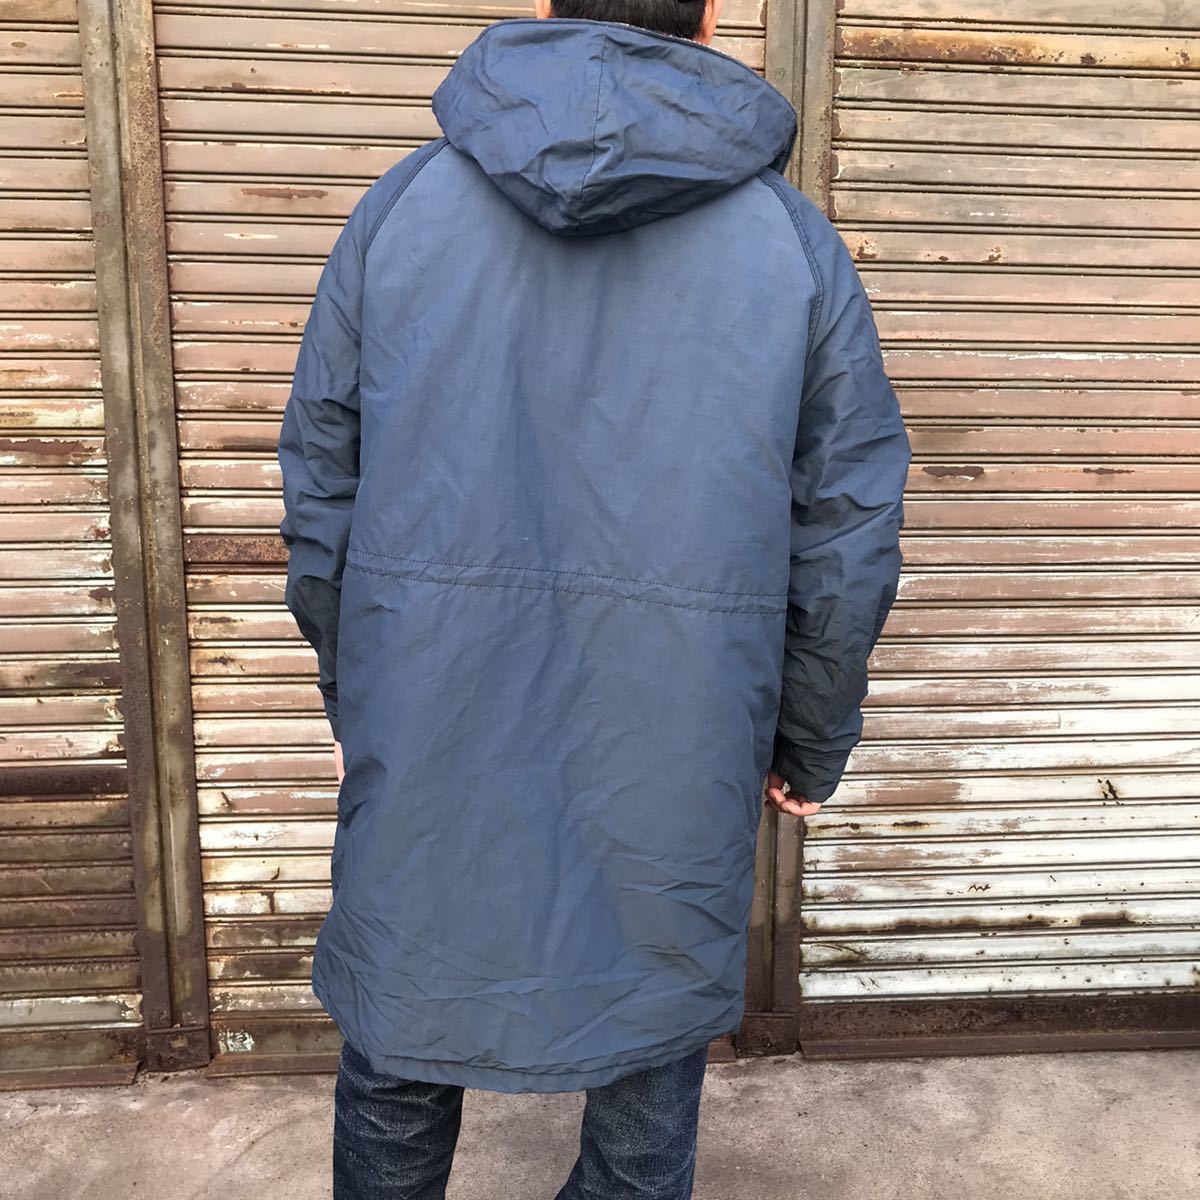 80s USA製 vintage woolrich ウールリッチ ヴィンテージ マウンテン